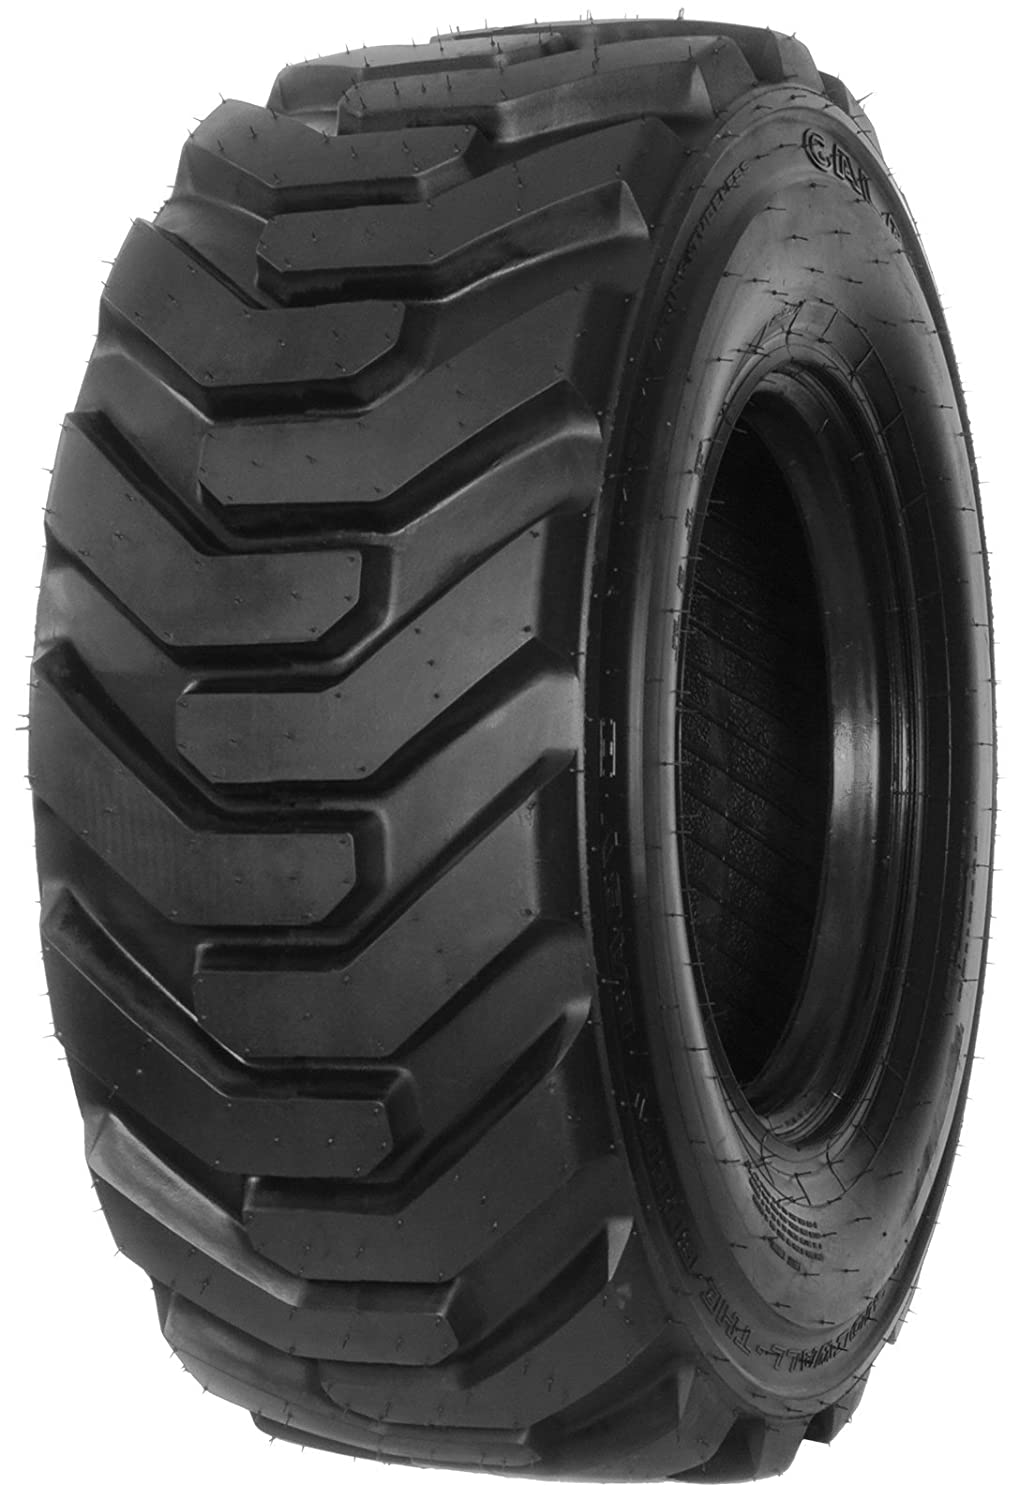 product_type-industrial_tires Galaxy Beefy Baby R-4 10PR TL 12 R16.5 P